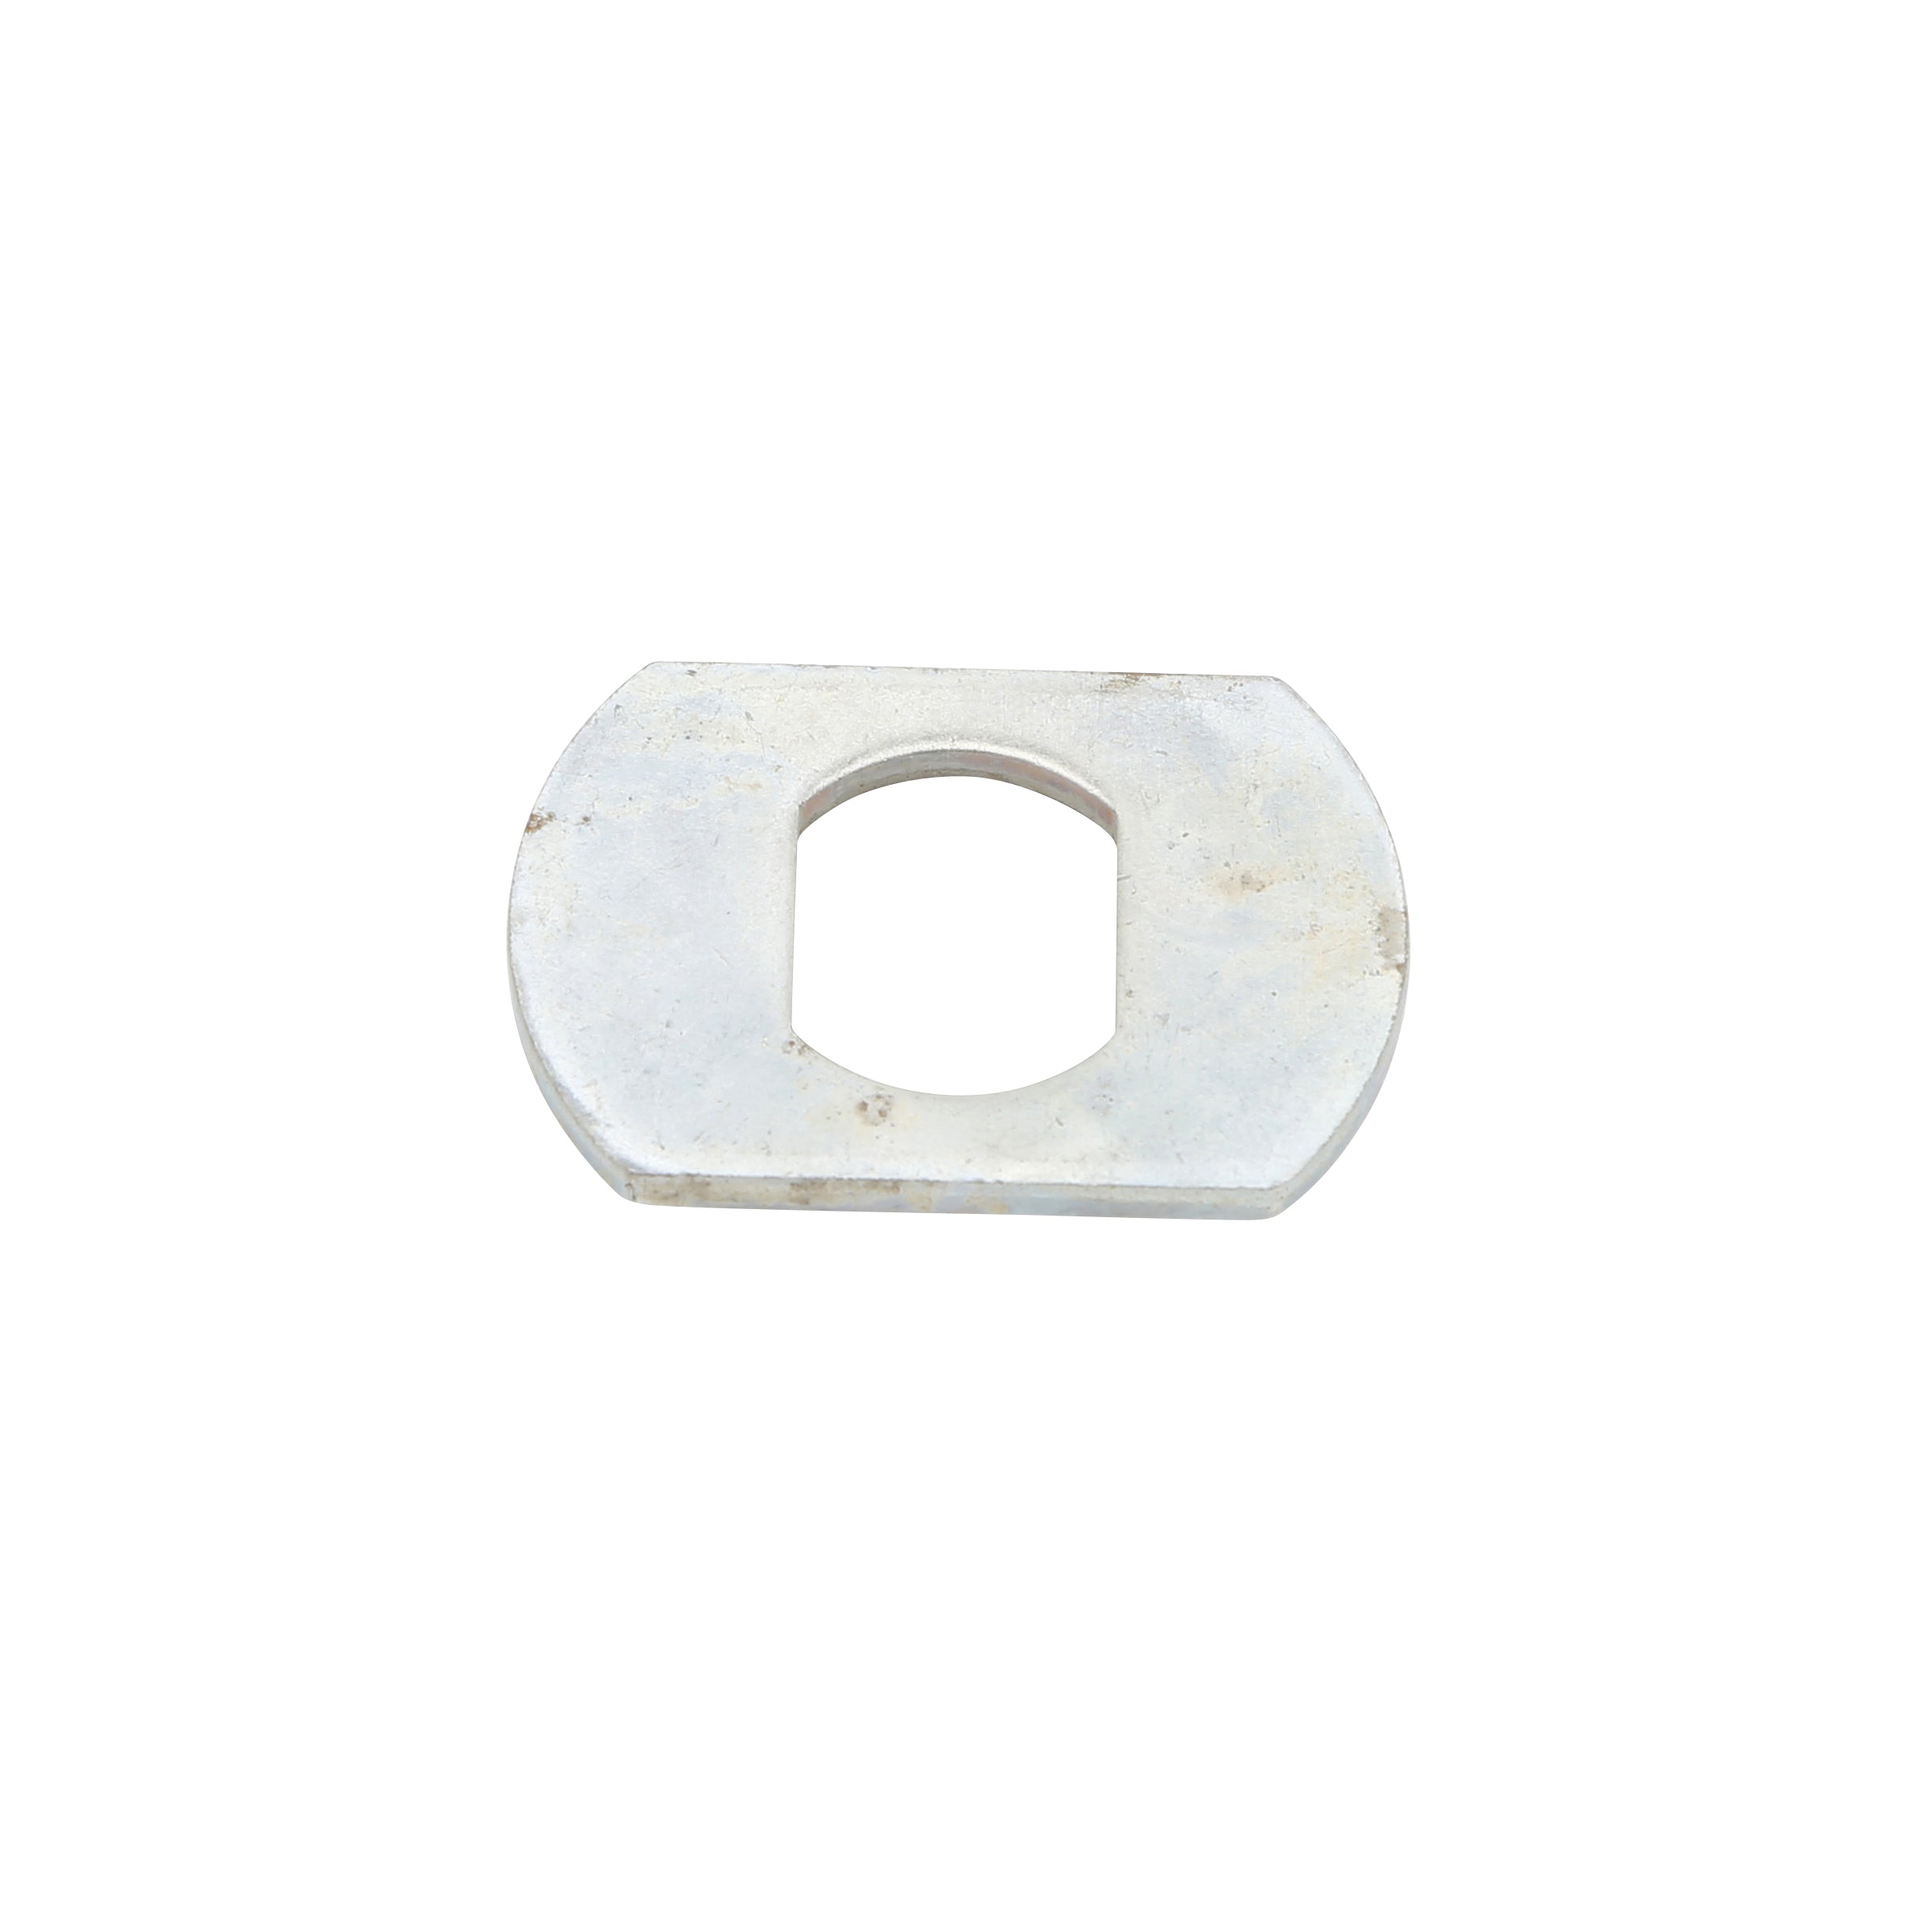 Wedge Stud Washer • 1928-31 Model A Ford